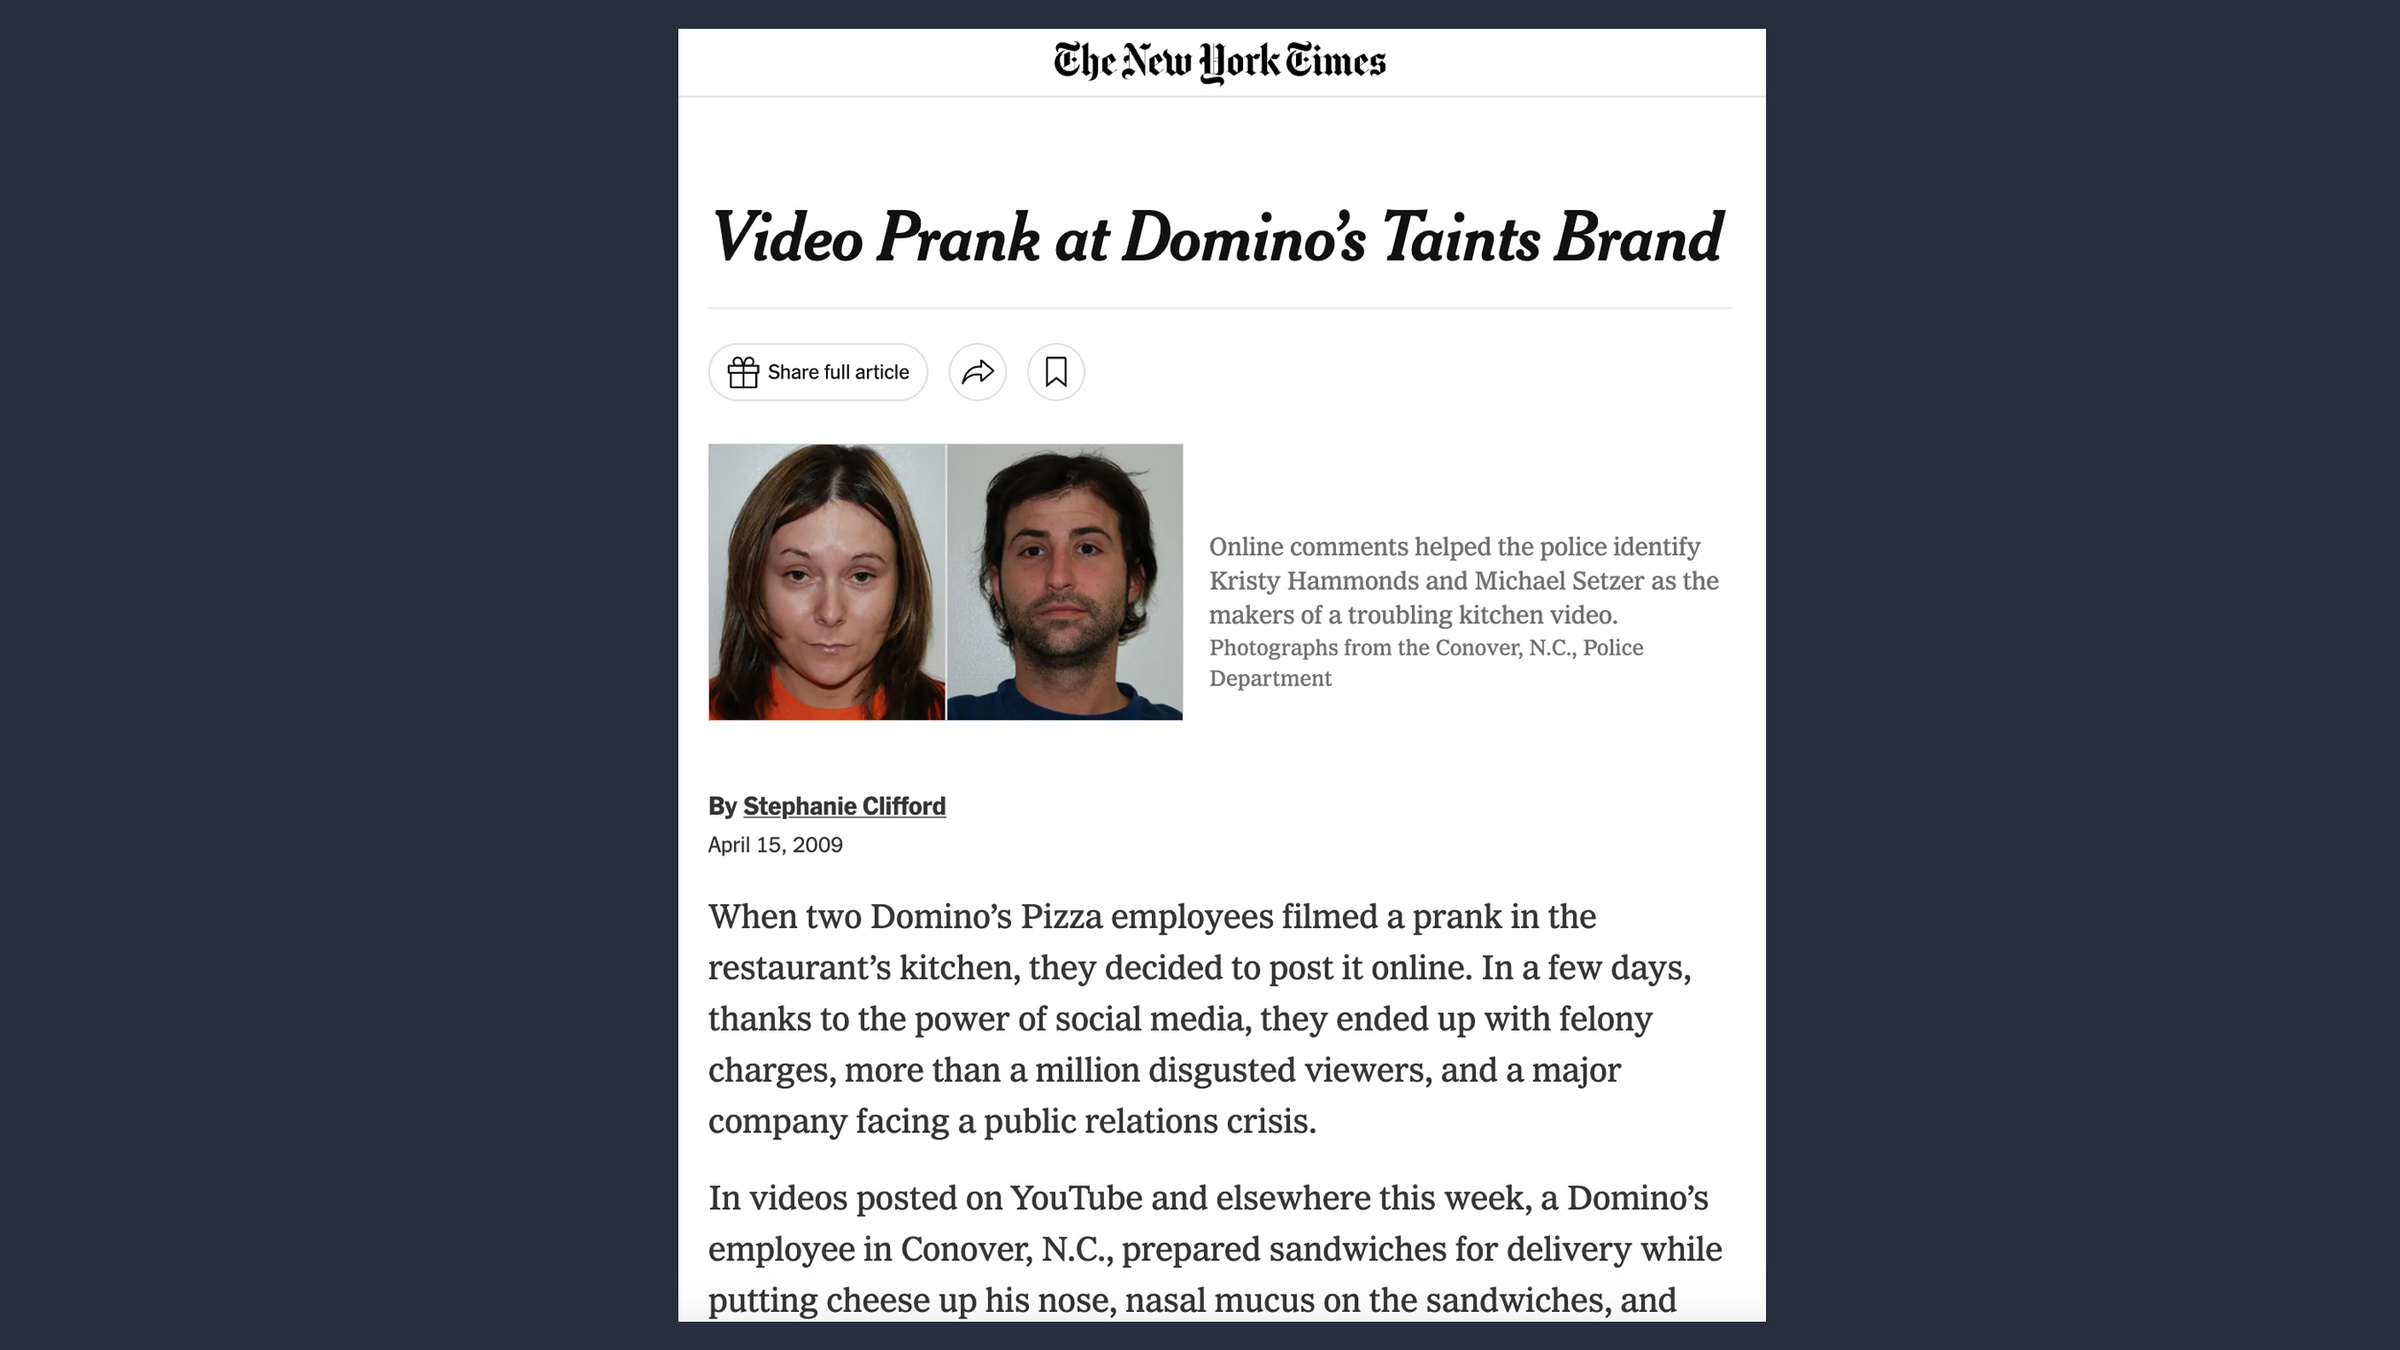 Even The New York Times supported the high-profile scandal involving two pizzeria employees.  Screen © nytimes.com